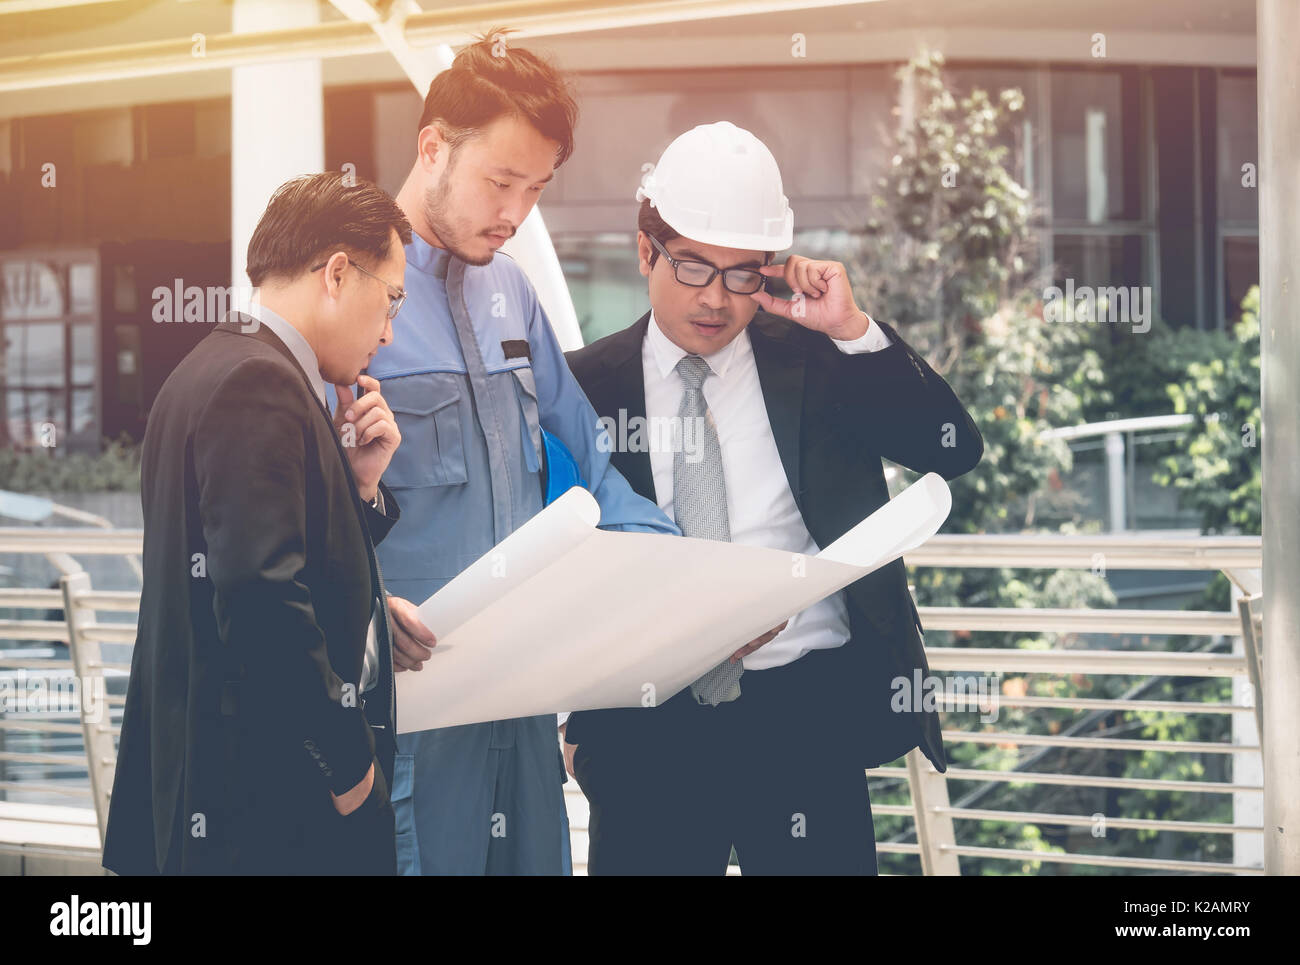 Team of architects and engineer at outdoor building and talking to planning work Stock Photo